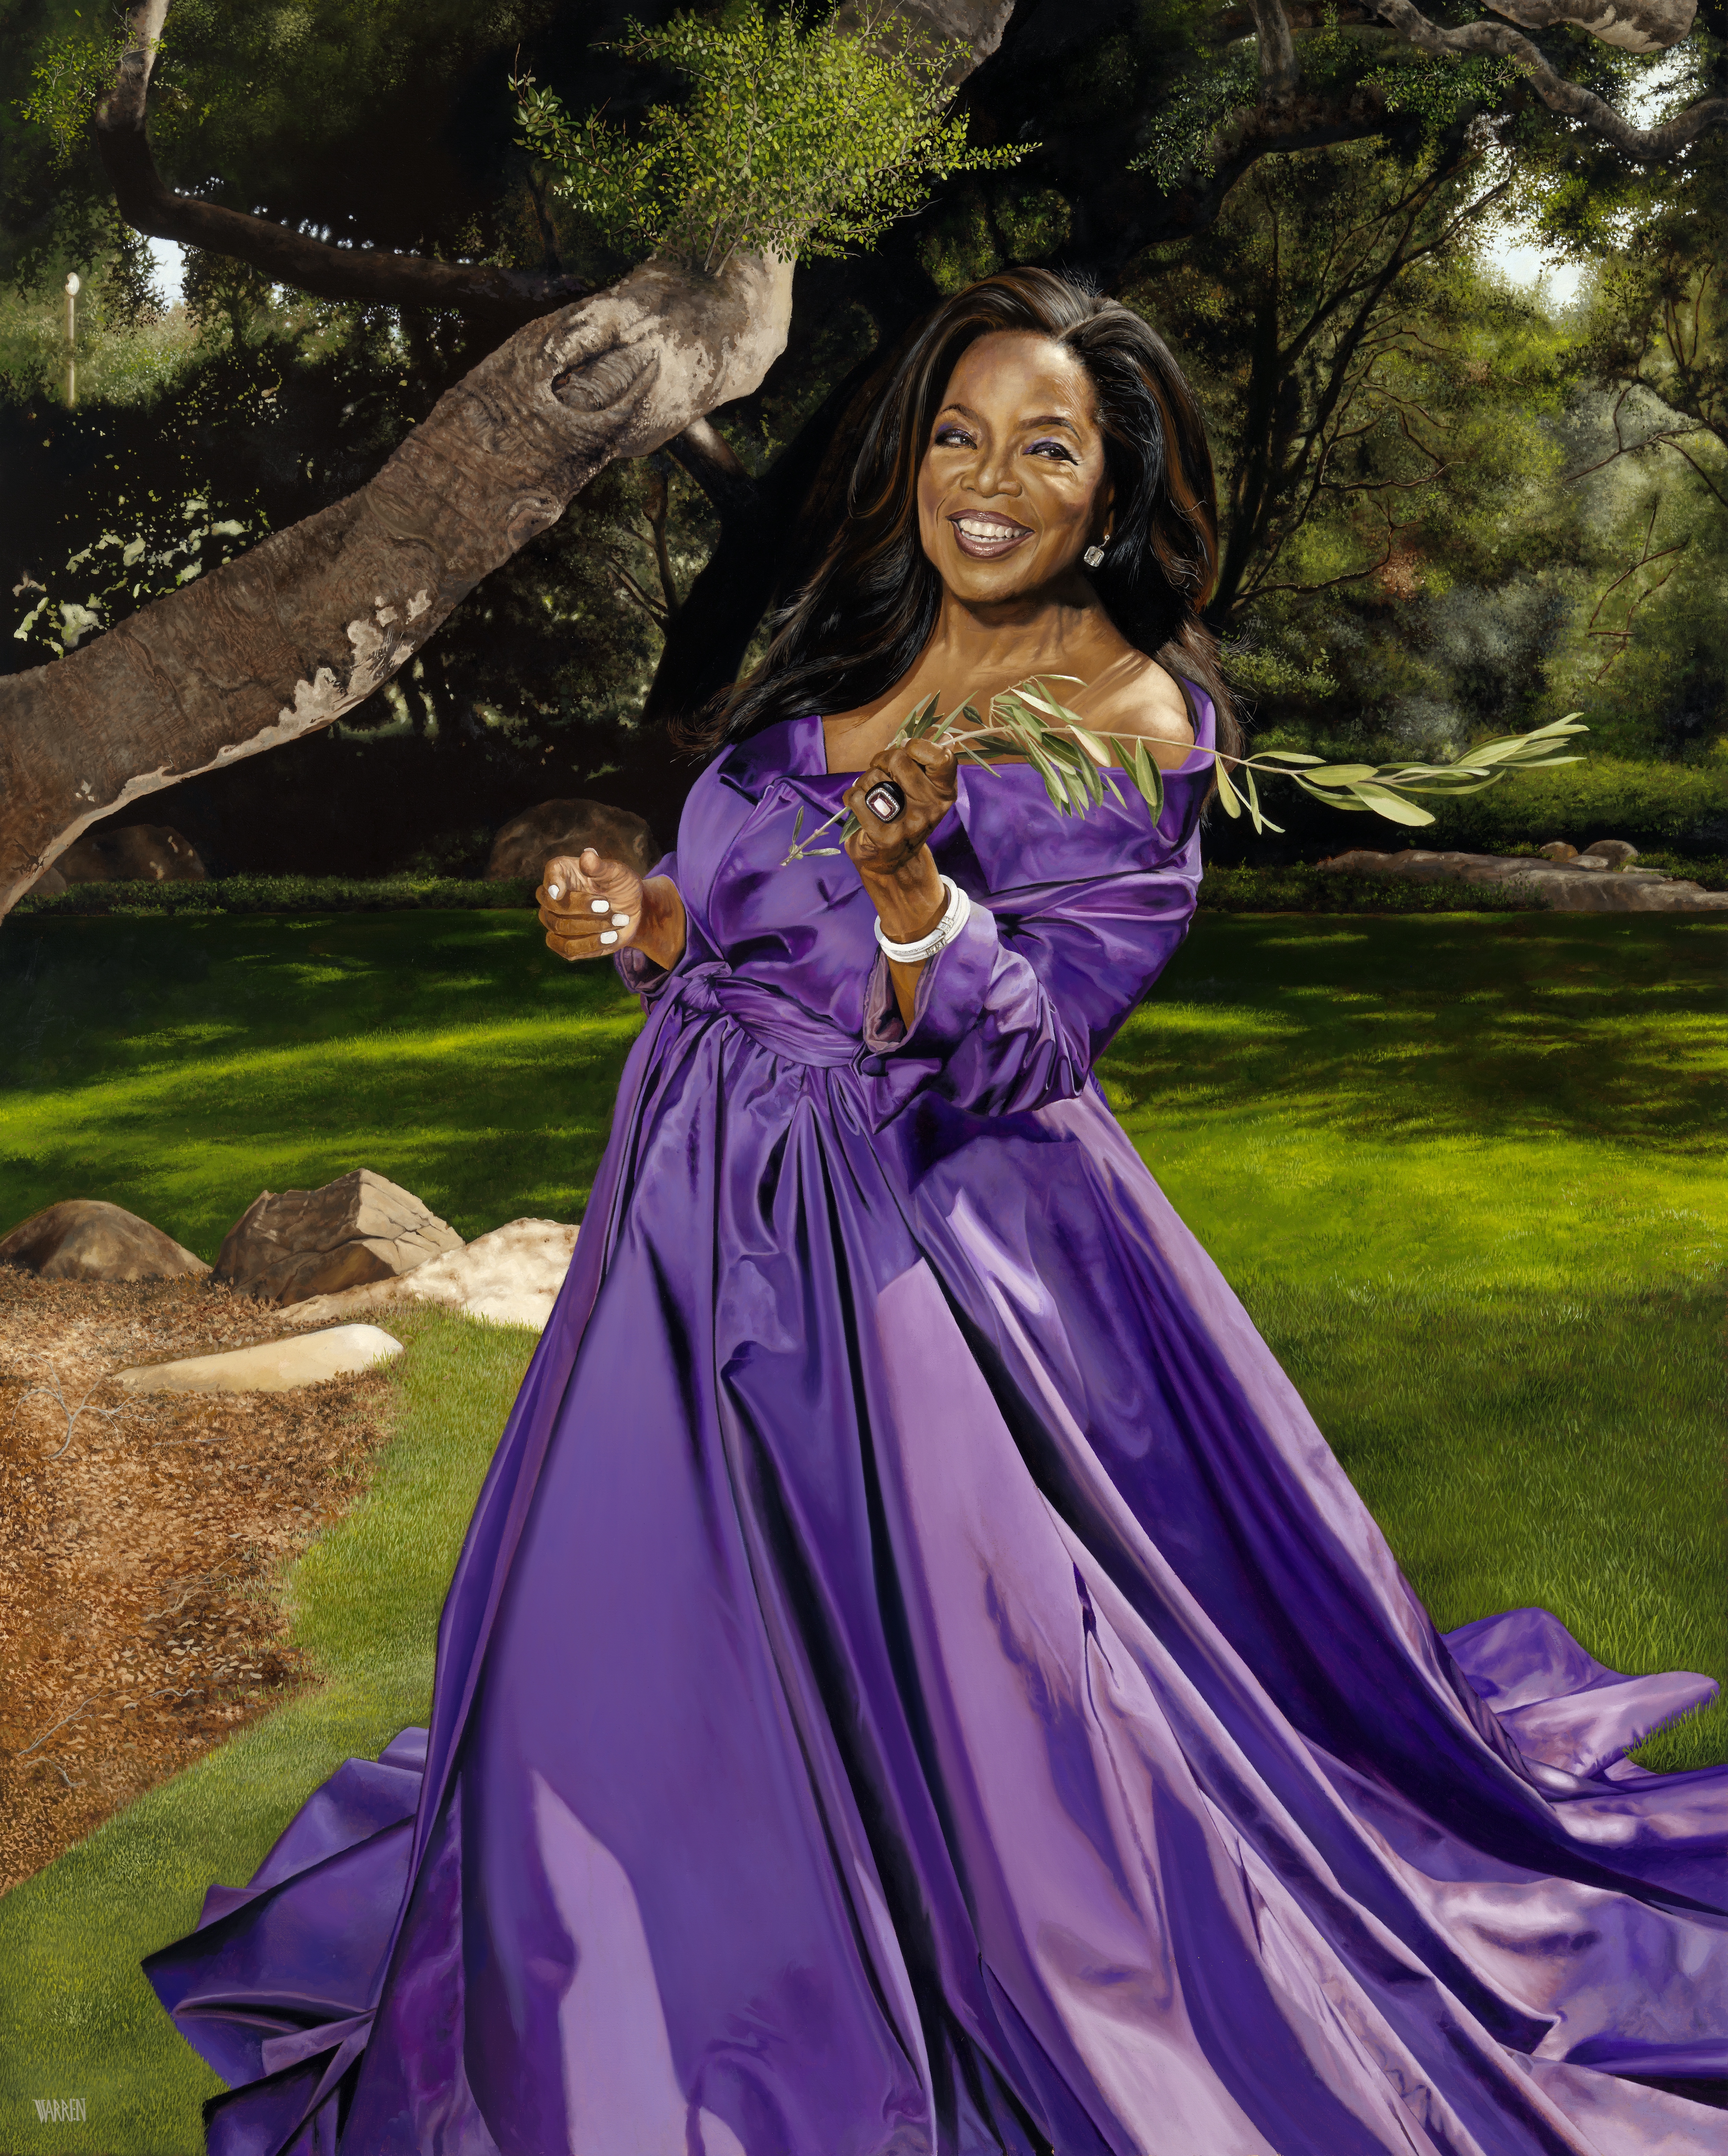 Woman in long, silky purple dress holds an olive branch while standing in a garden with a large tree branch in the background.